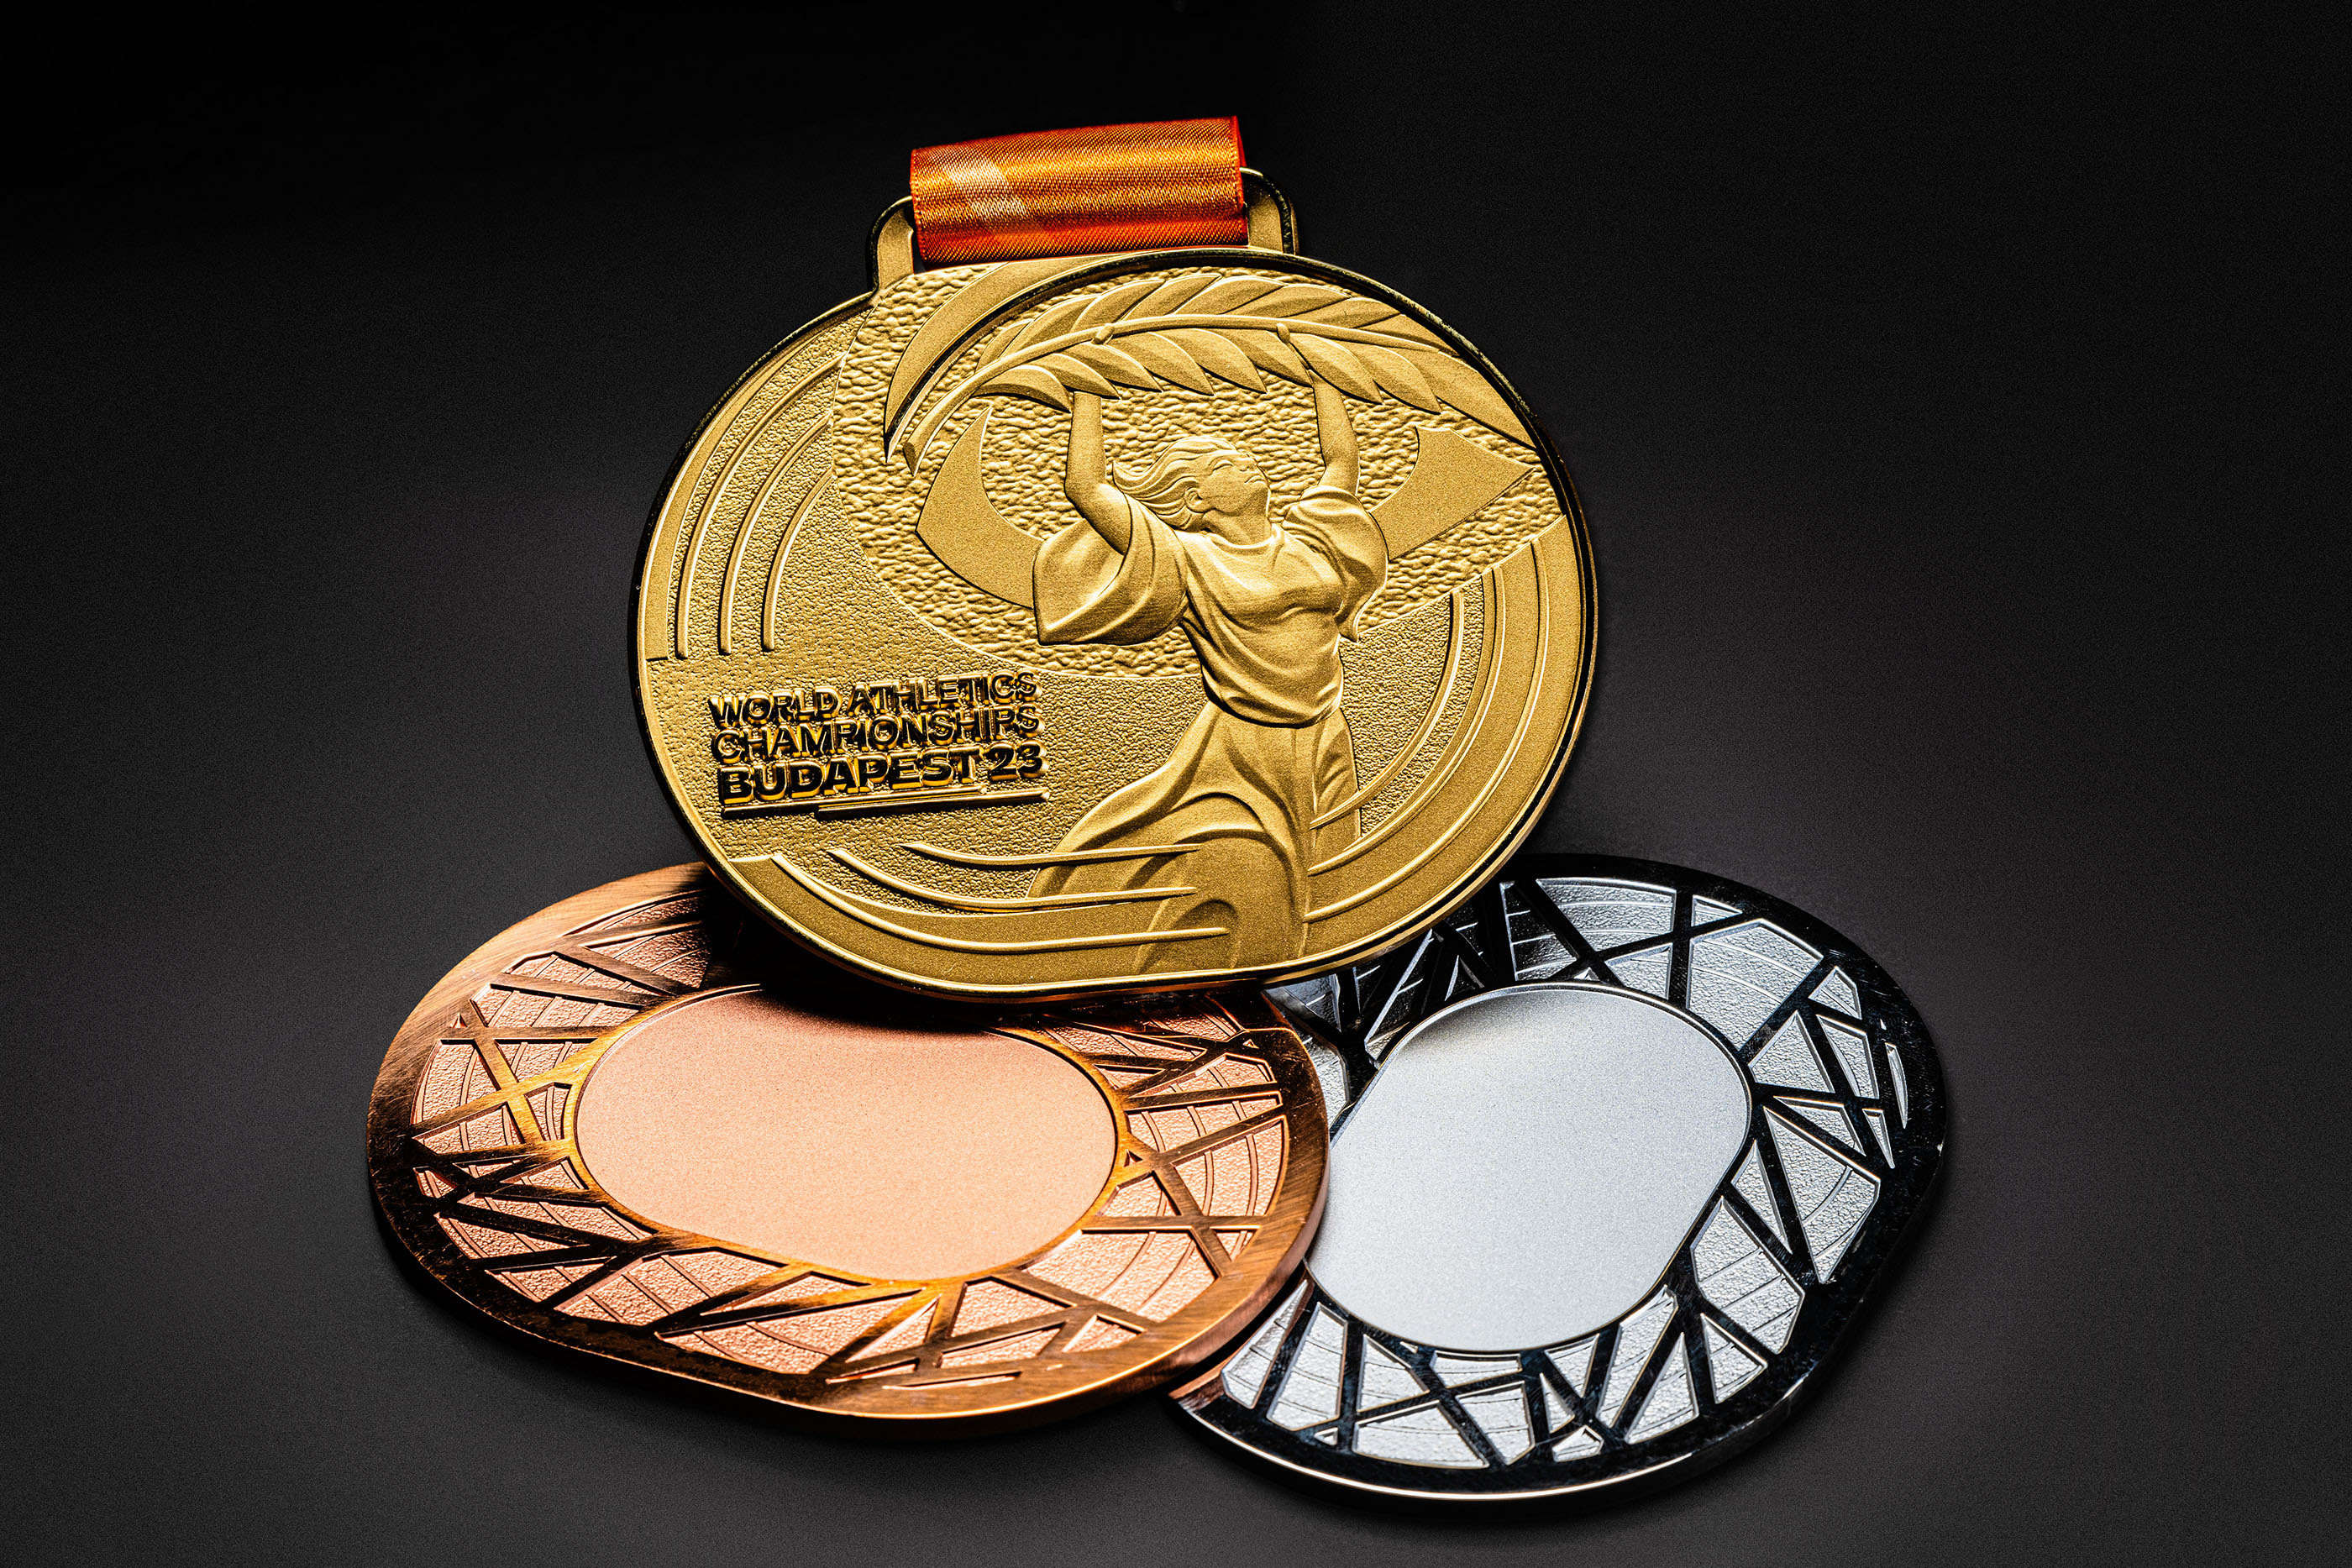 Athletics Medals for World Championships Budapest 2023 unveiled